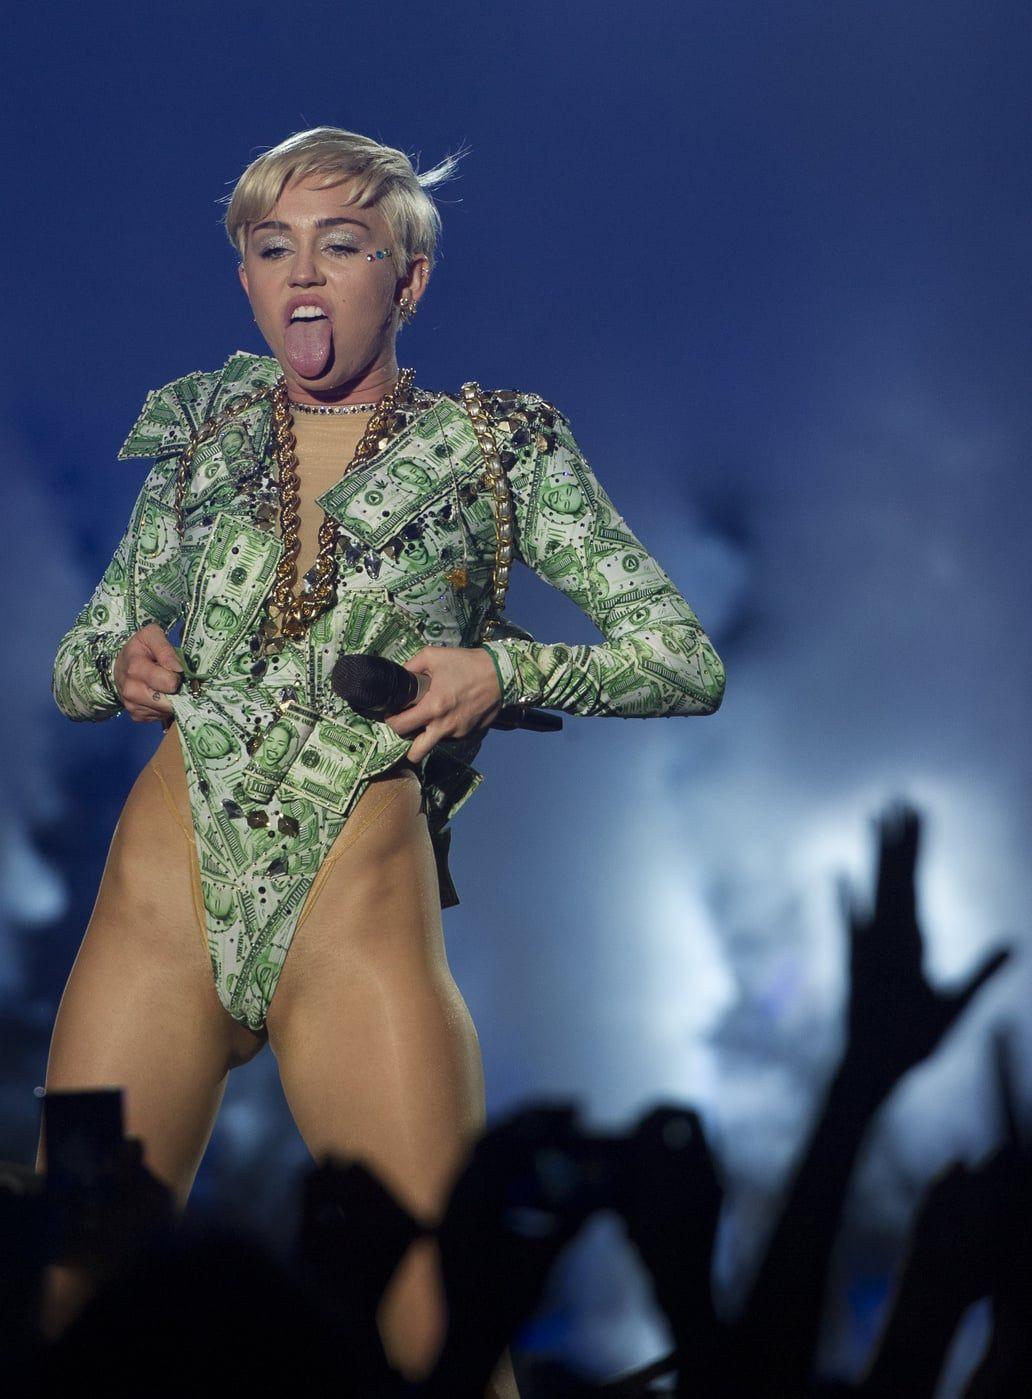 Sexy Miley Cyrus Exposes Her Nude Boobs As She Performs